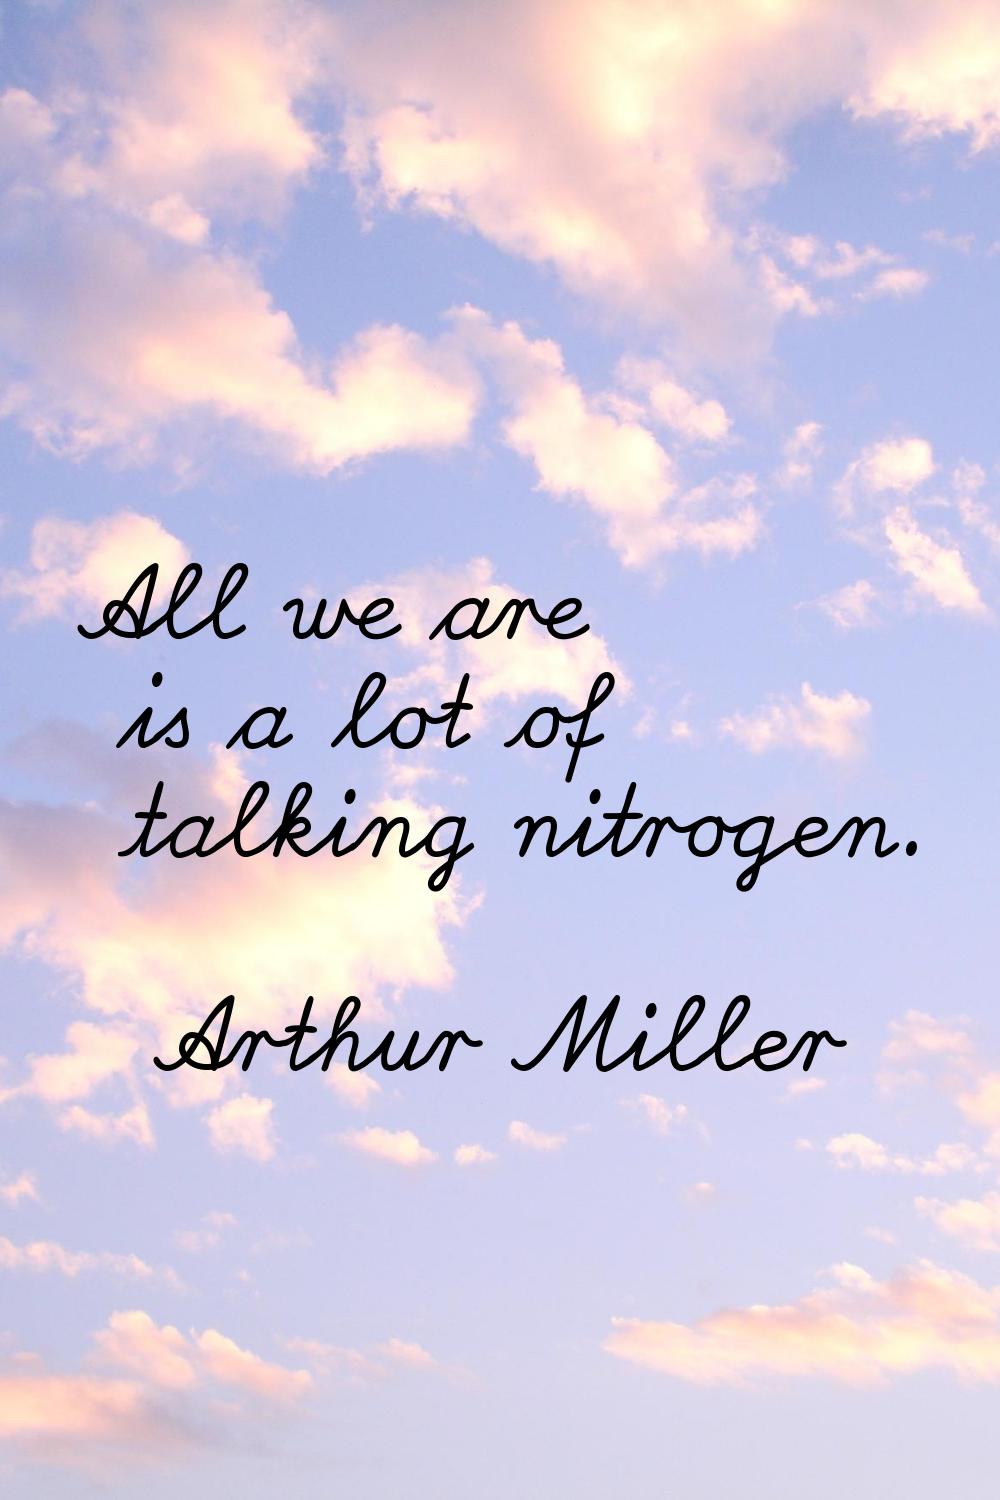 All we are is a lot of talking nitrogen.